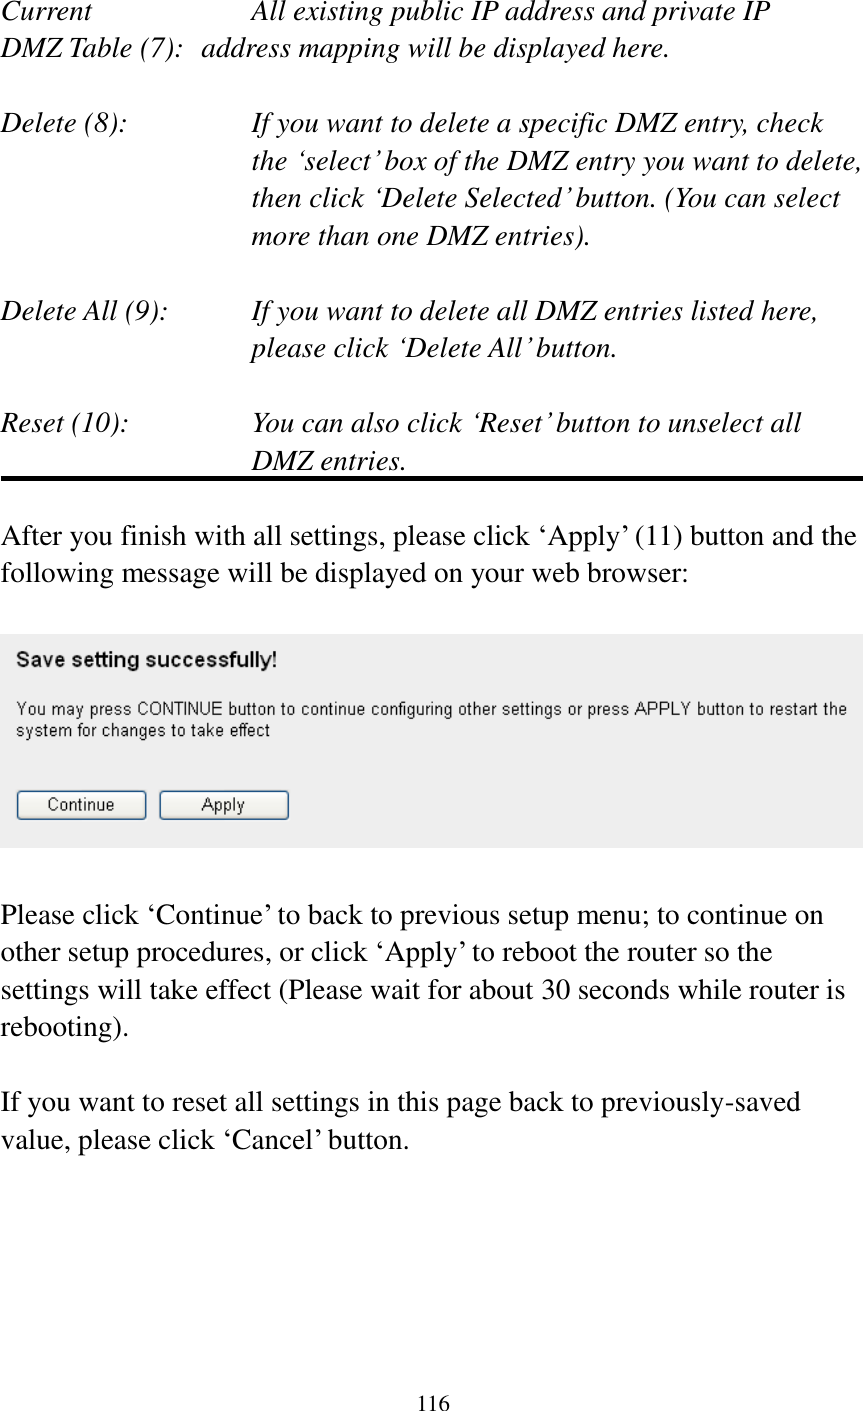 116   Current        All existing public IP address and private IP DMZ Table (7):   address mapping will be displayed here.  Delete (8):      If you want to delete a specific DMZ entry, check     the ‘select’ box of the DMZ entry you want to delete, then click ‘Delete Selected’ button. (You can select more than one DMZ entries).  Delete All (9):    If you want to delete all DMZ entries listed here, please click ‘Delete All’ button.  Reset (10):    You can also click ‘Reset’ button to unselect all DMZ entries.  After you finish with all settings, please click ‘Apply’ (11) button and the following message will be displayed on your web browser:    Please click ‘Continue’ to back to previous setup menu; to continue on other setup procedures, or click ‘Apply’ to reboot the router so the settings will take effect (Please wait for about 30 seconds while router is rebooting).  If you want to reset all settings in this page back to previously-saved value, please click ‘Cancel’ button.      